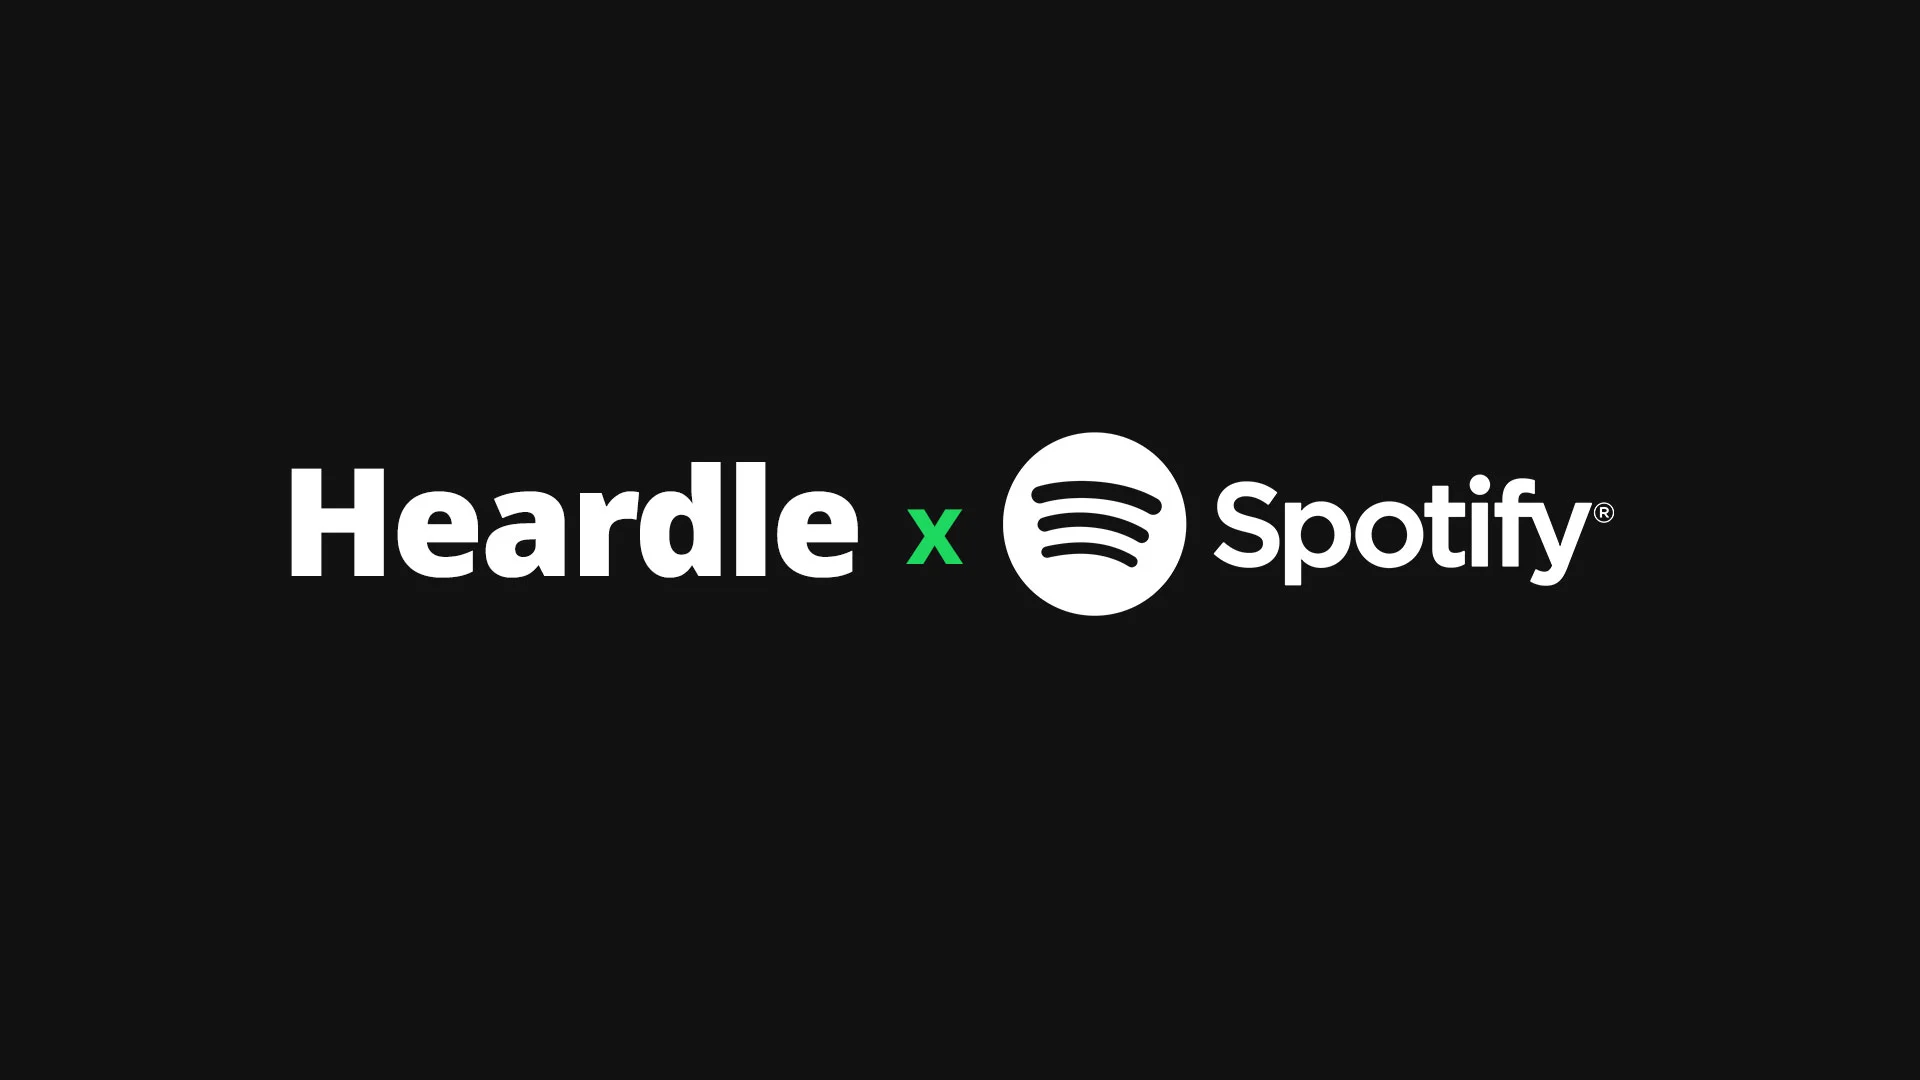 Spotify to Acquire Heardle, the Music Trivia Game